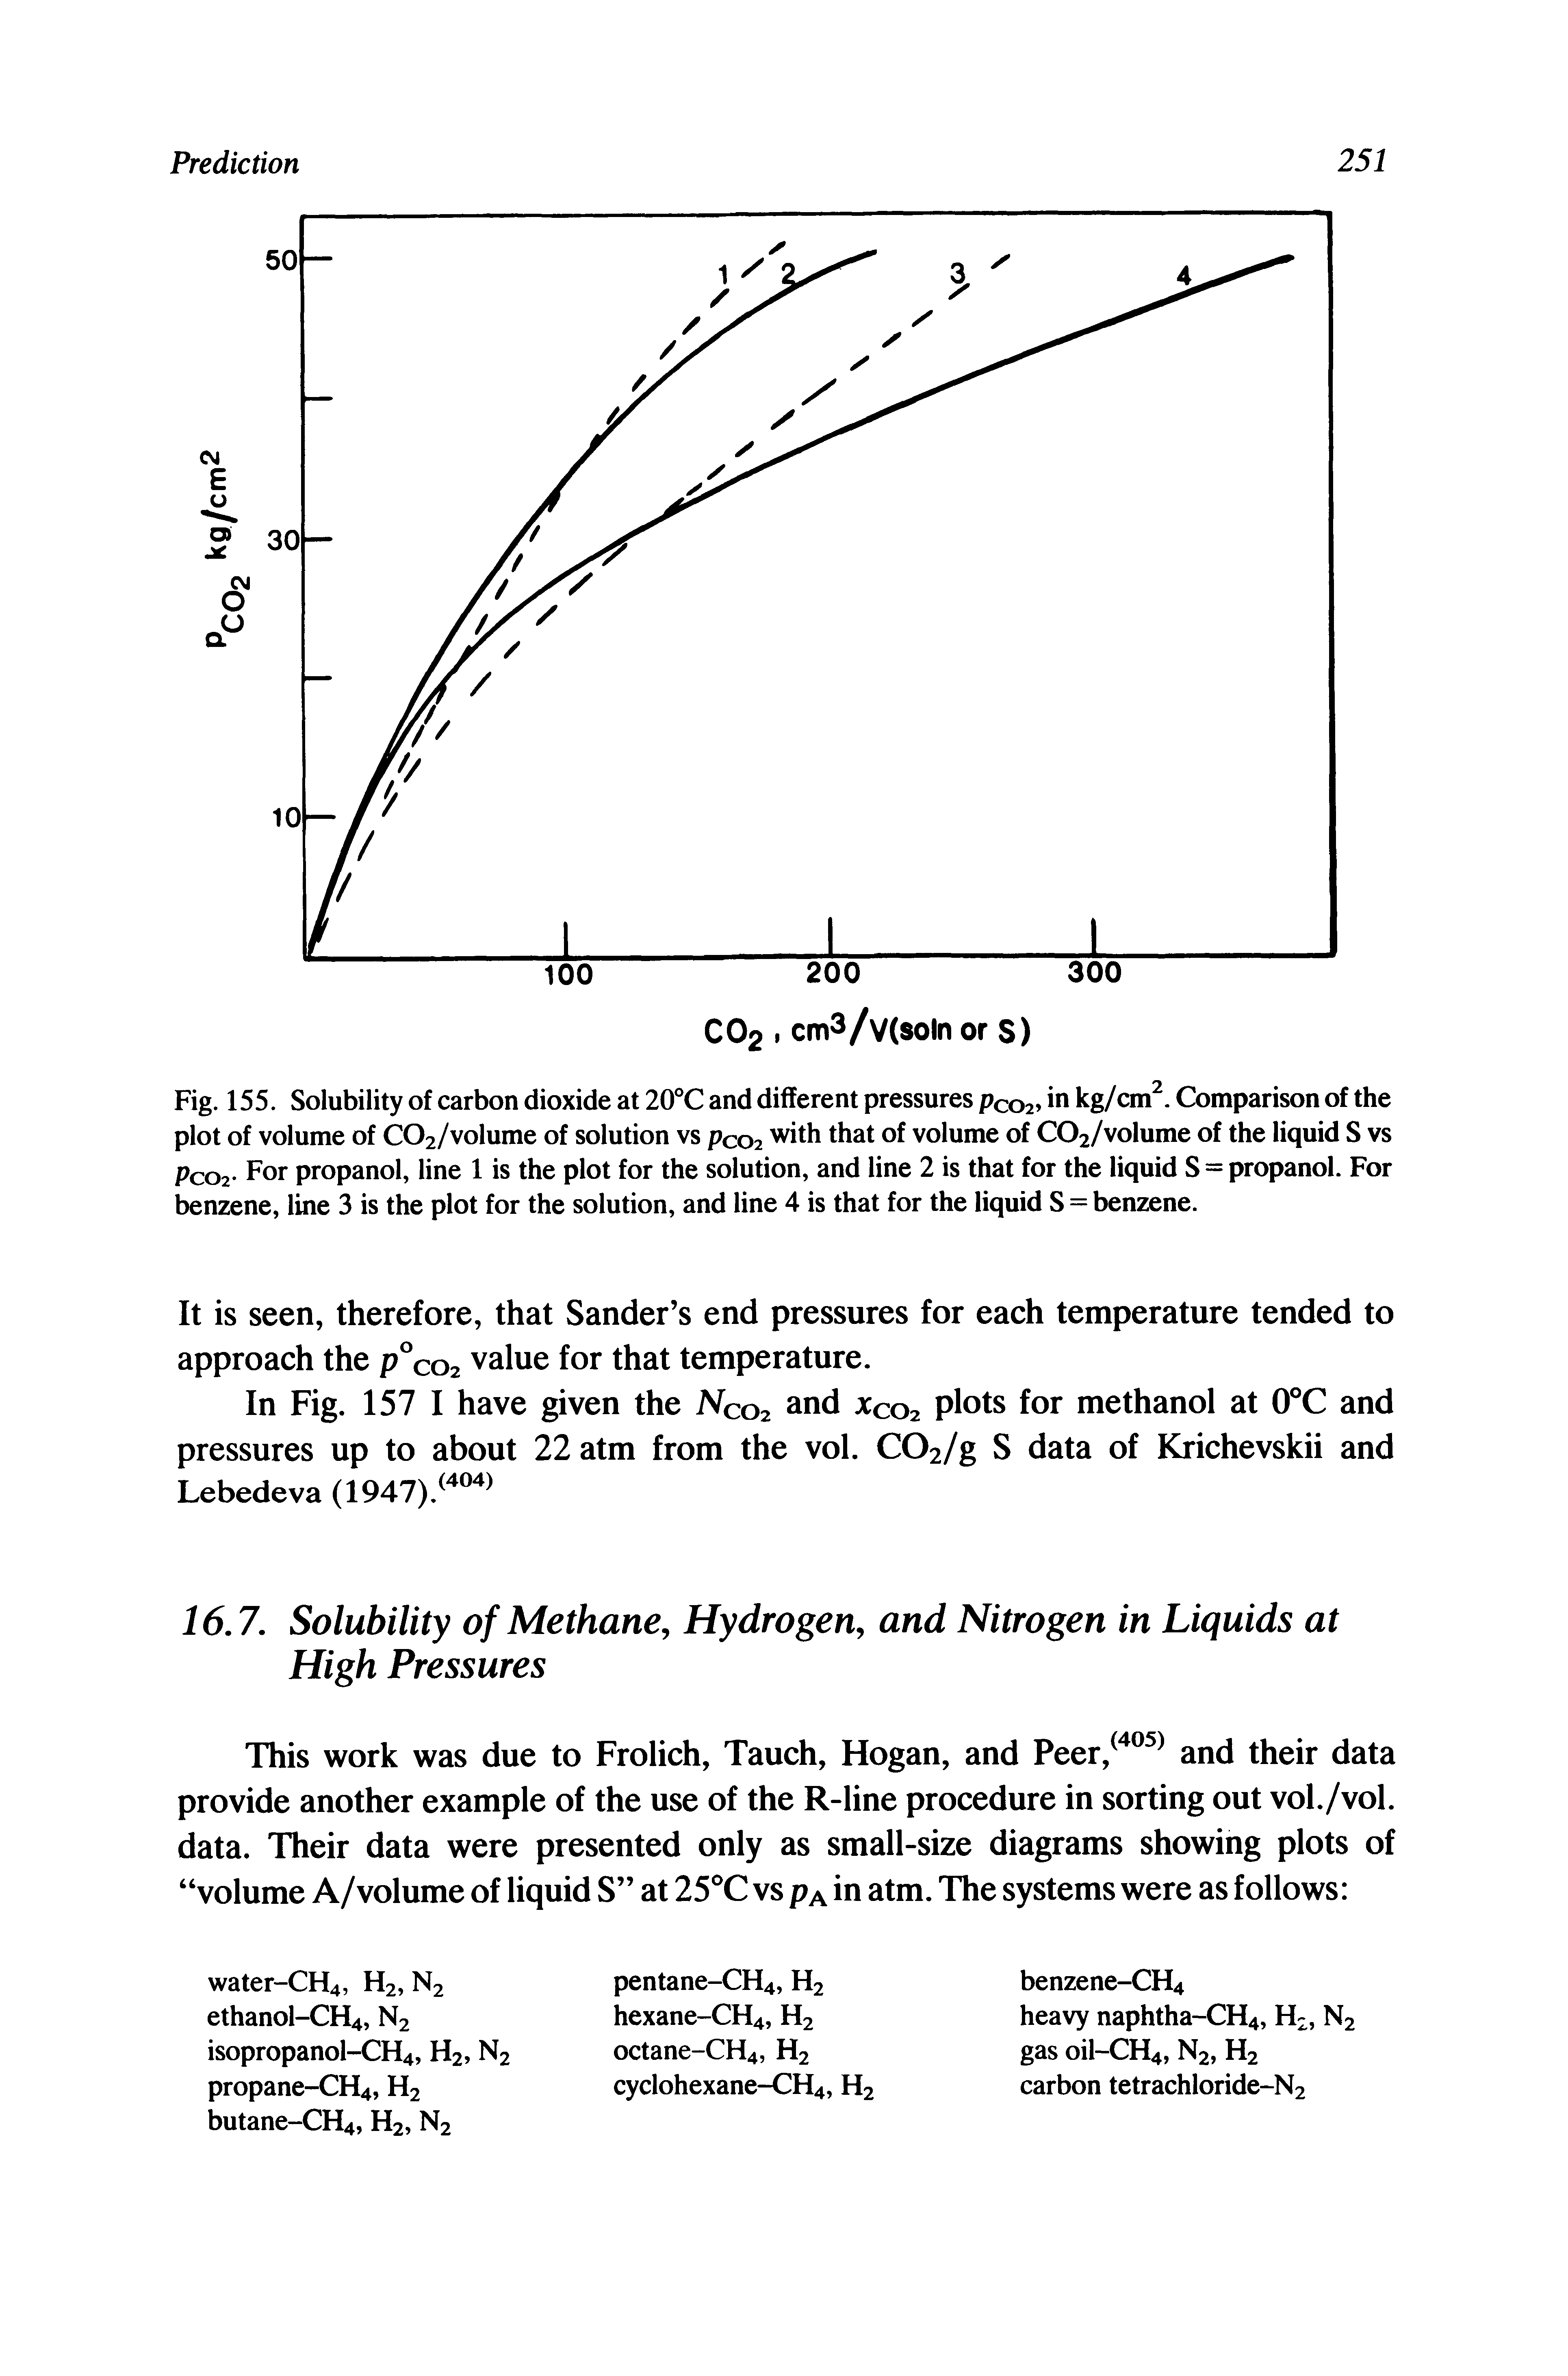 Fig. 155. Solubility of carbon dioxide at 20°C and different pressures pco2.Comparison of the plot of volume of C02/volume of solution vs pcoj with that of volume of COa/volume of the liquid S vs Pco2- For propanol, line 1 is the plot for the solution, and line 2 is that for the liquid S = propanol. For benzene, line 3 is the plot for the solution, and line 4 is that for the liquid S = benzene.